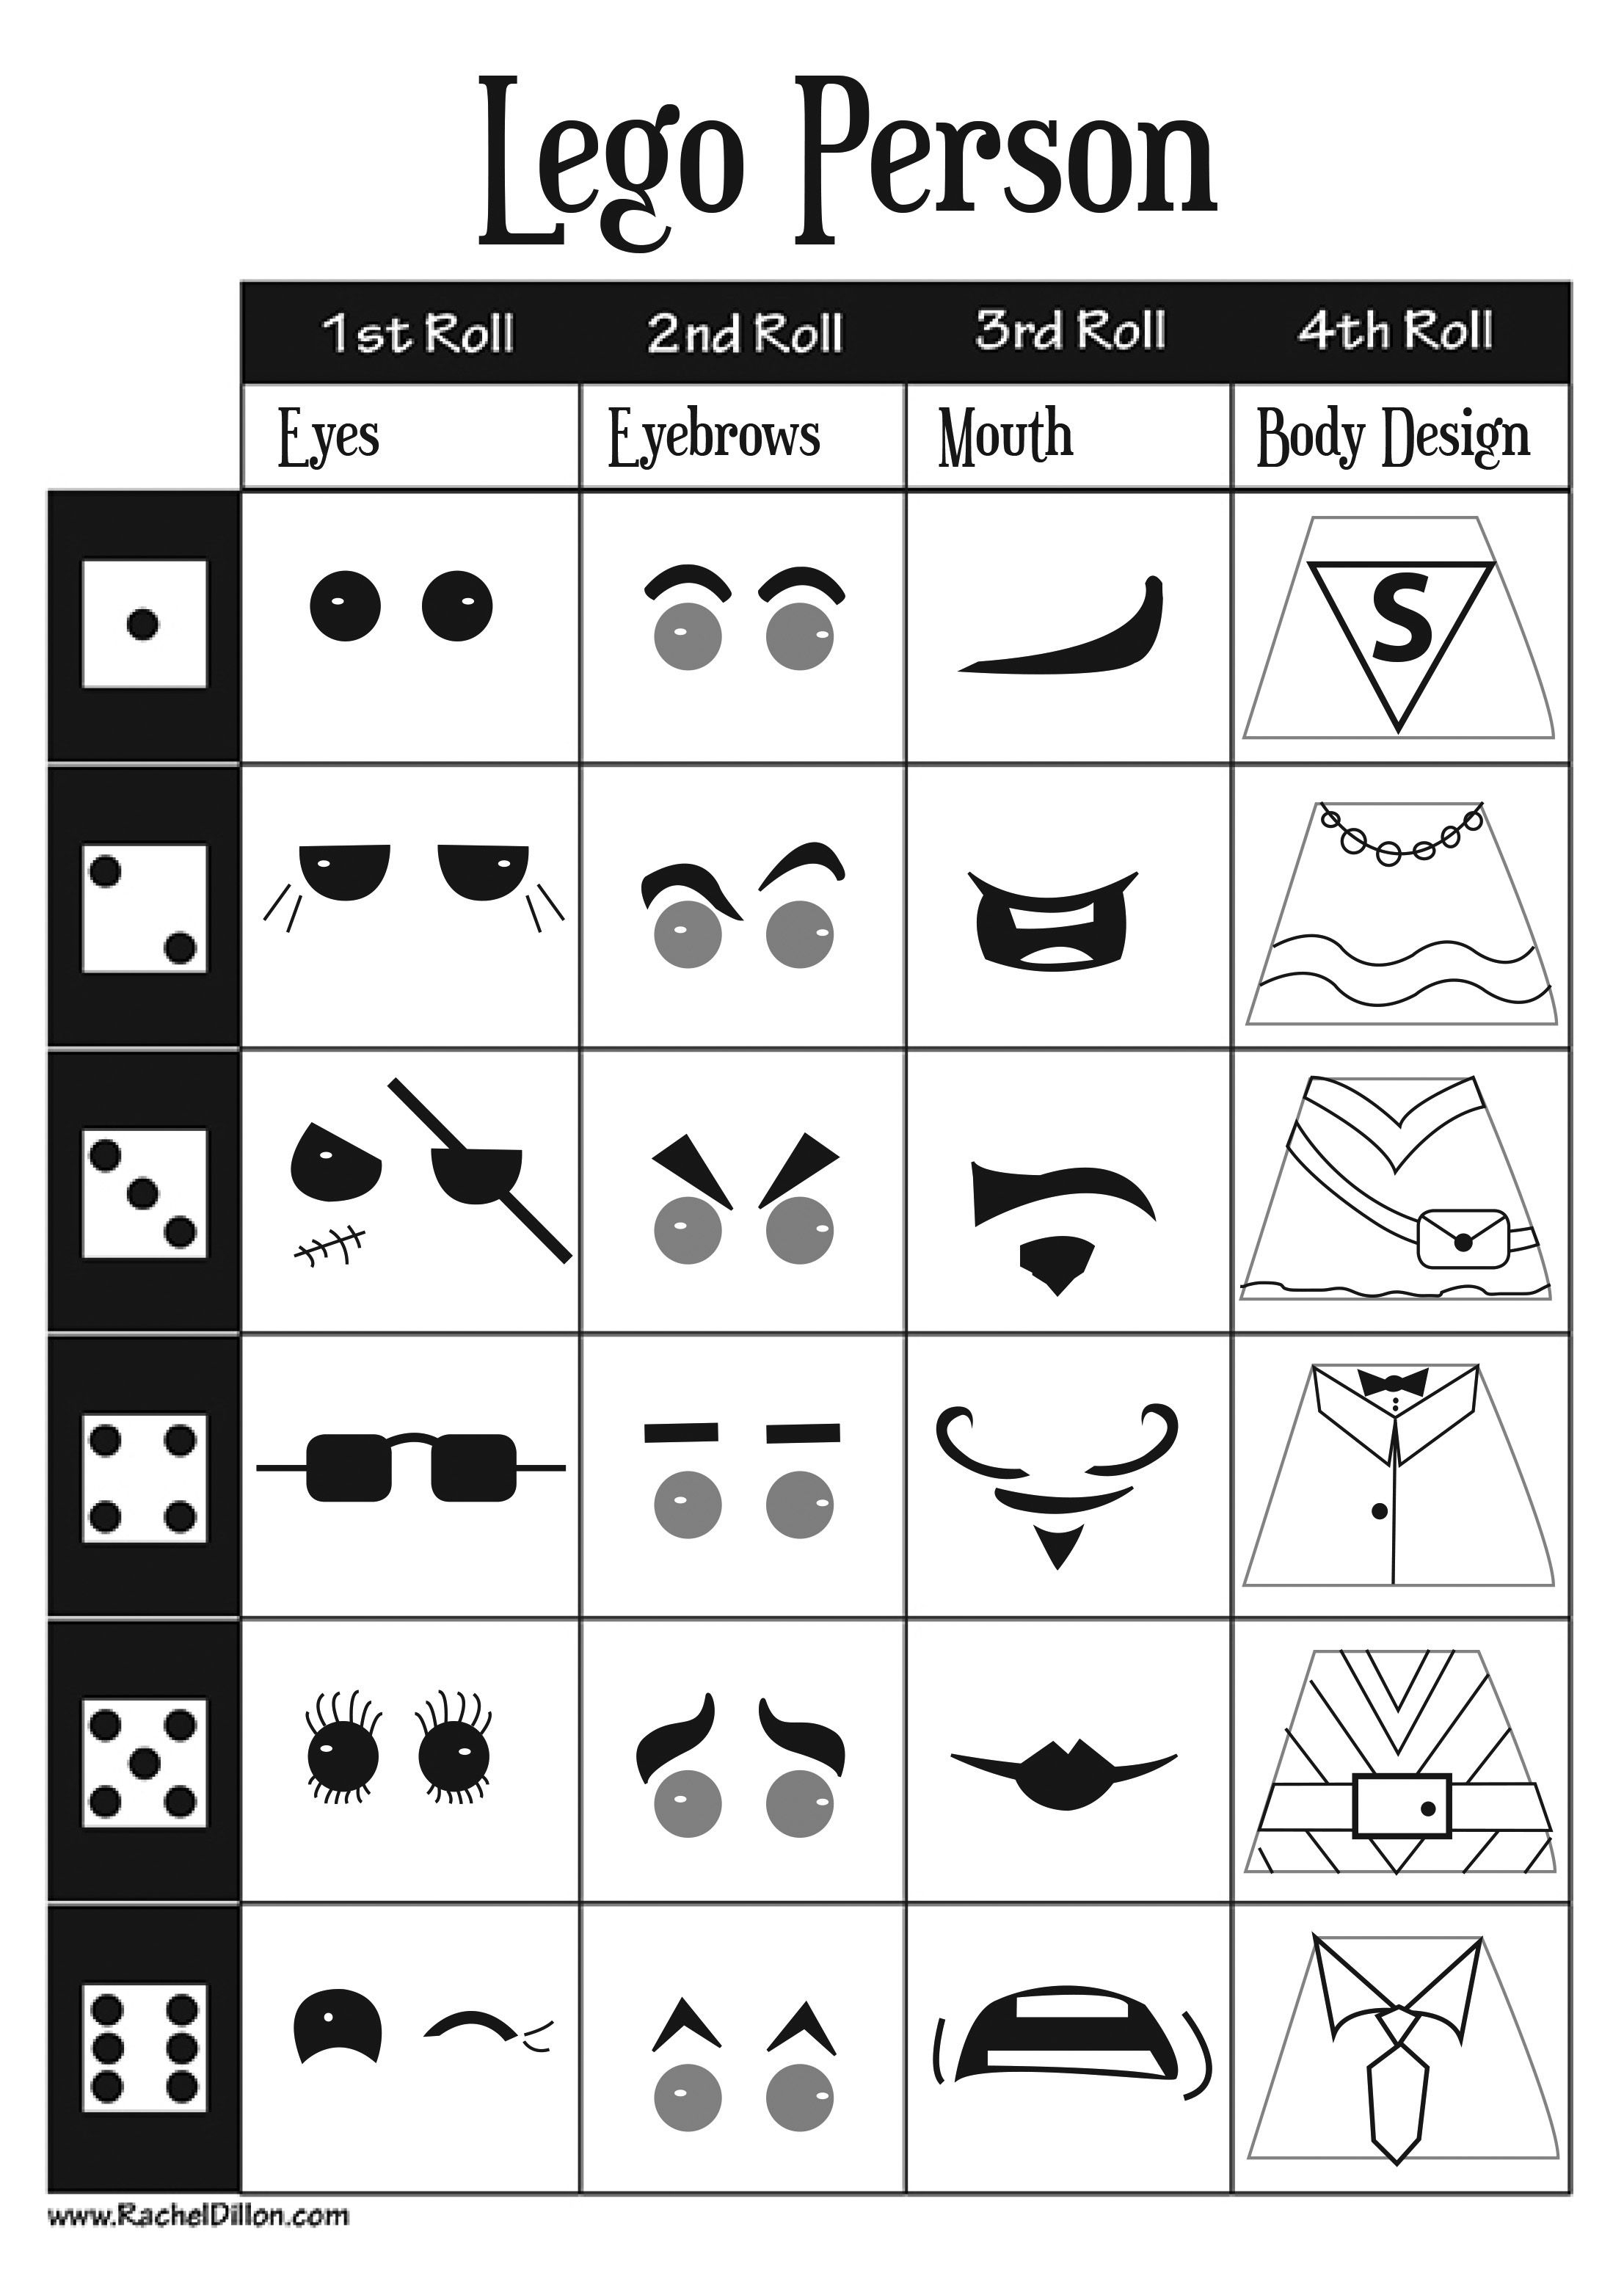 Lego Person Dice Game For Kids Art Project. This Is A Great Sheet - Roll A Monster Free Printable